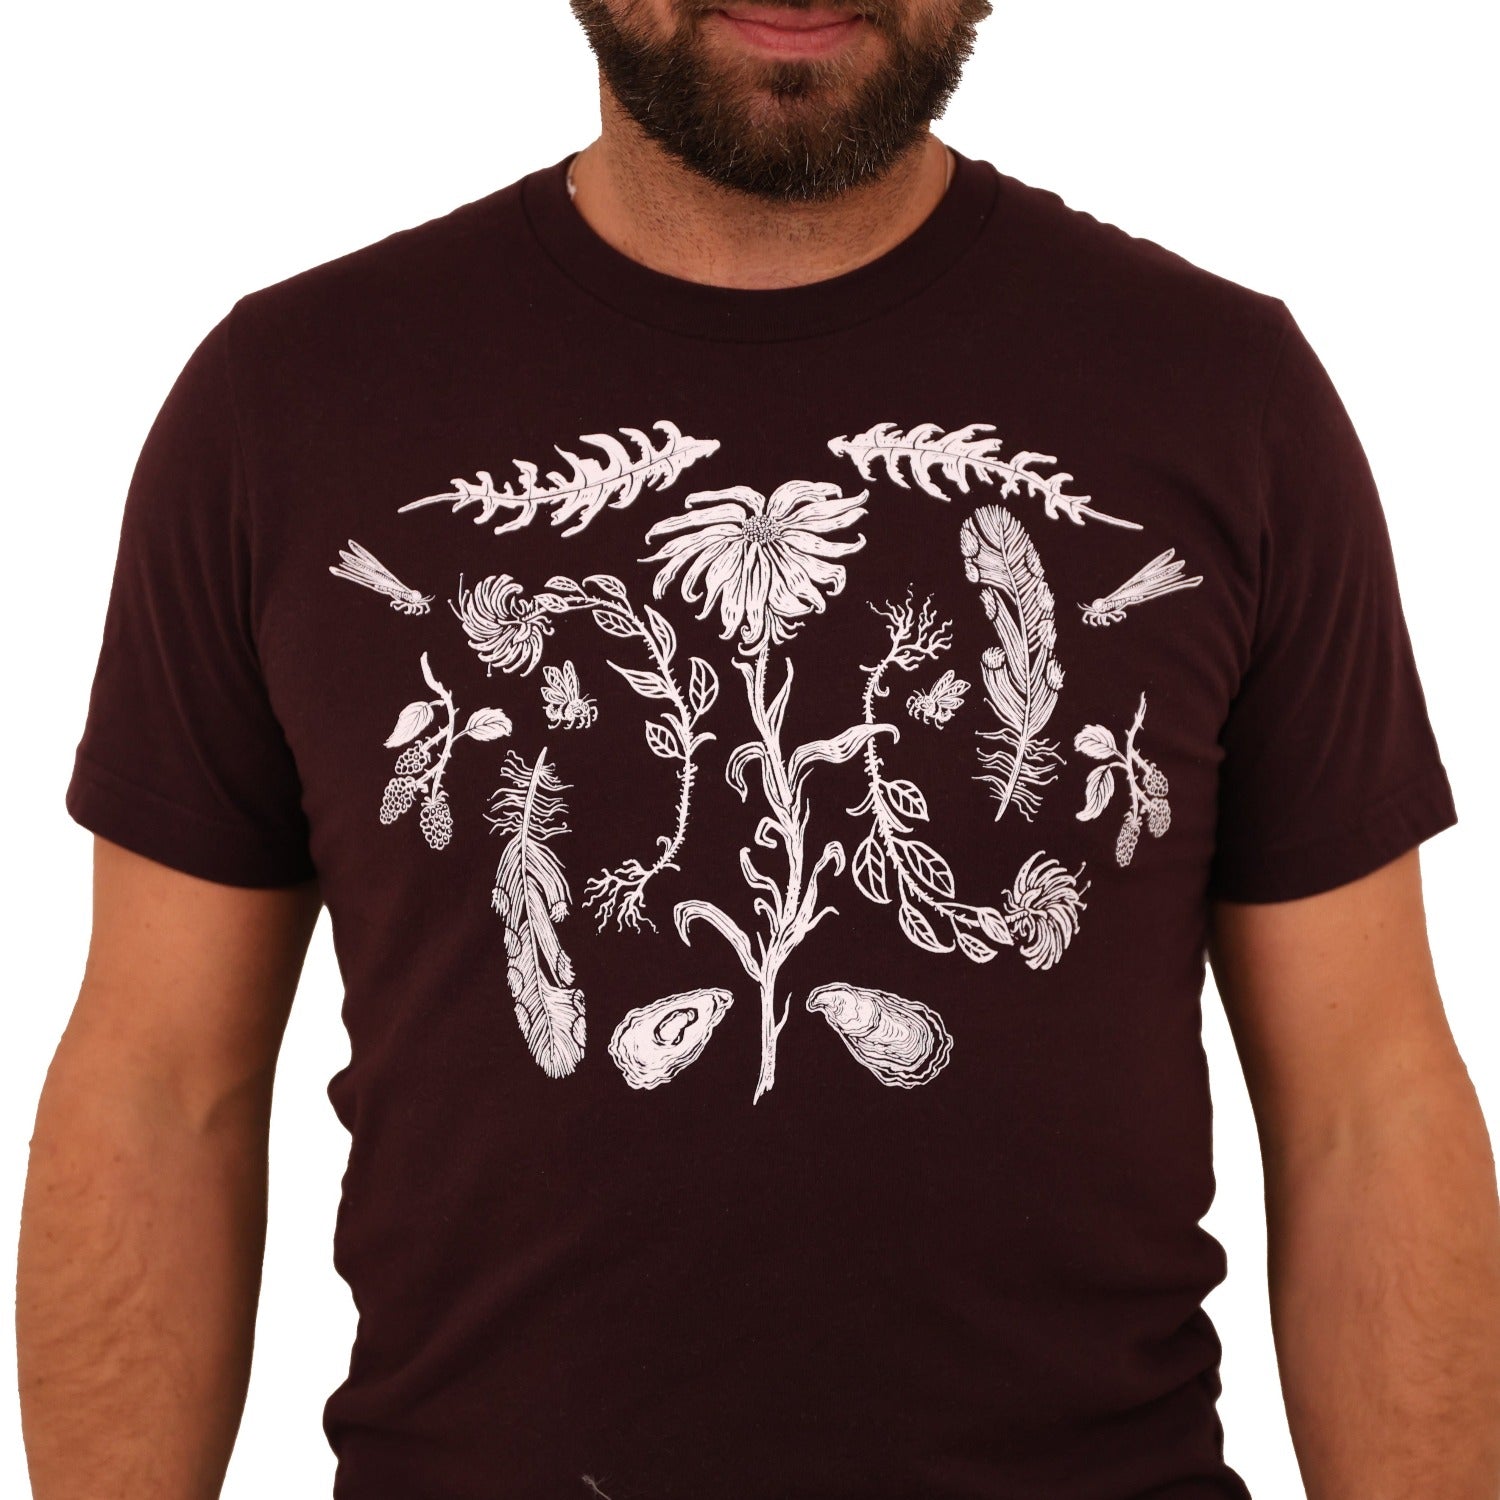 Man wearing a oxblood colored t-shirt with white ink of flowers, ferns, feathers, shells, etc